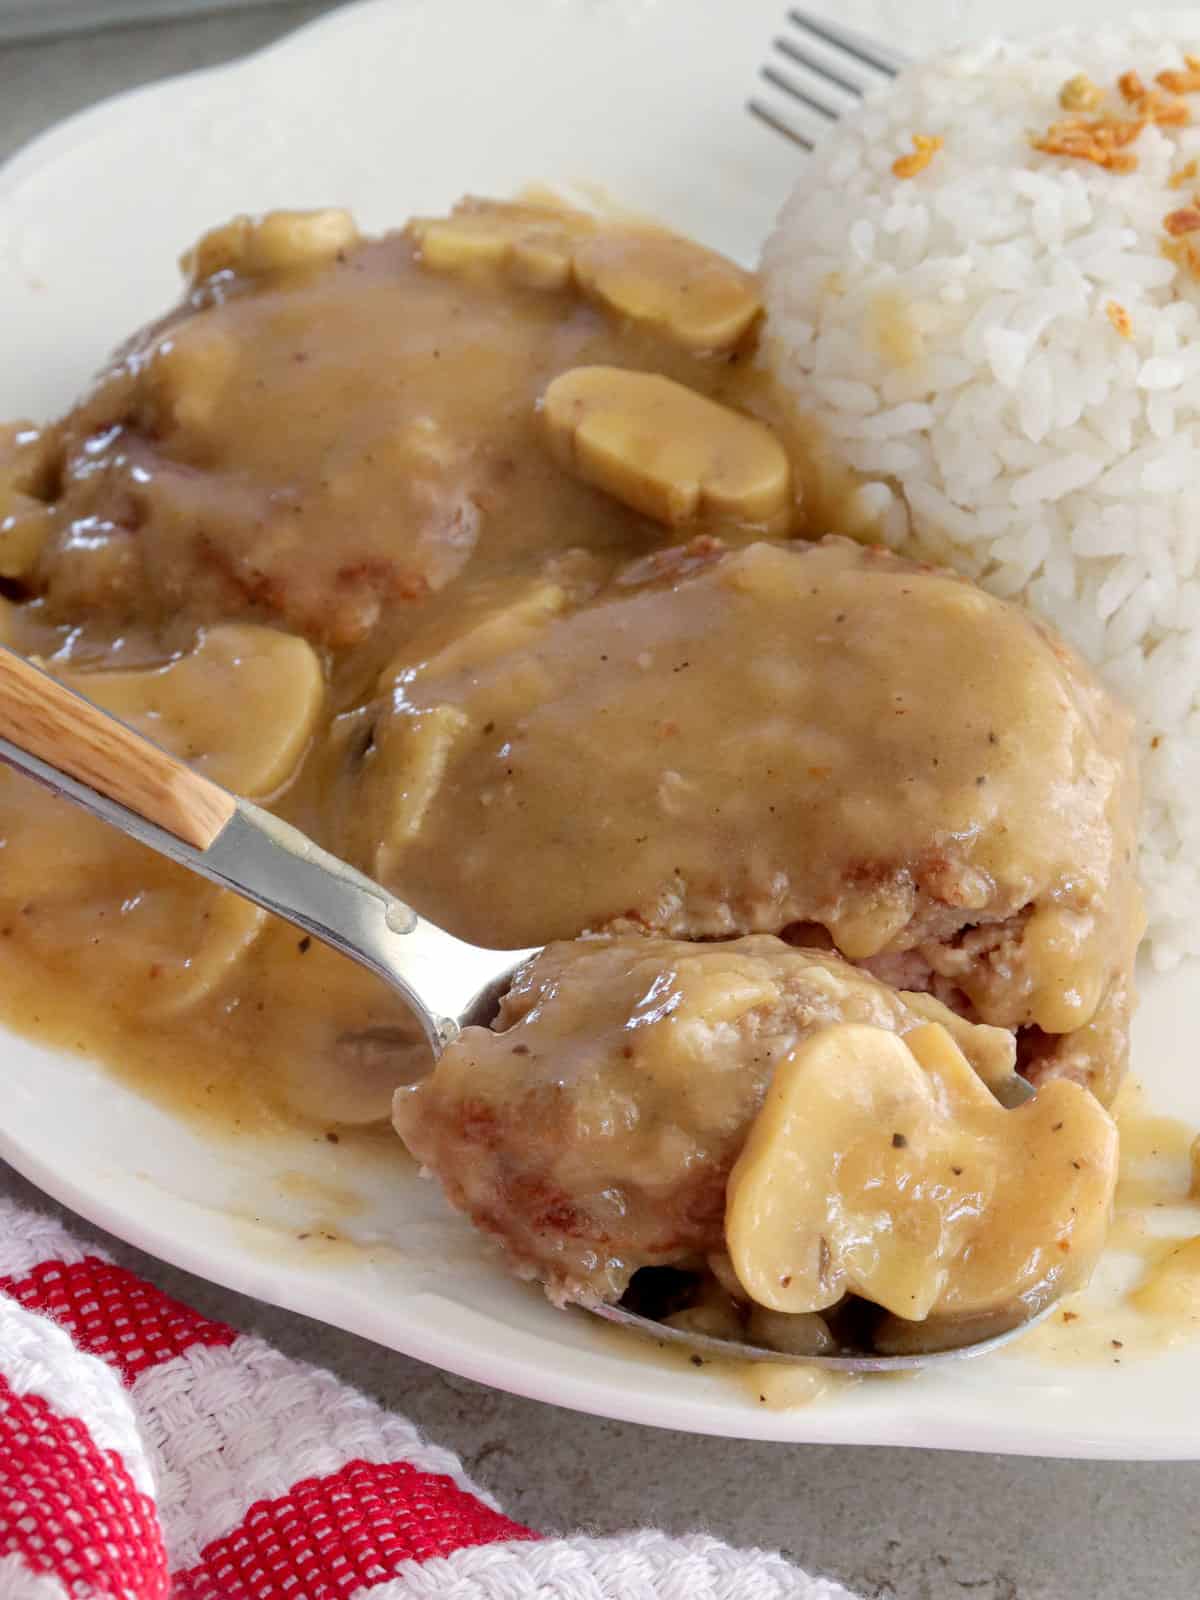 burger steak with mushroom gravy and steamed rice on a white plate.